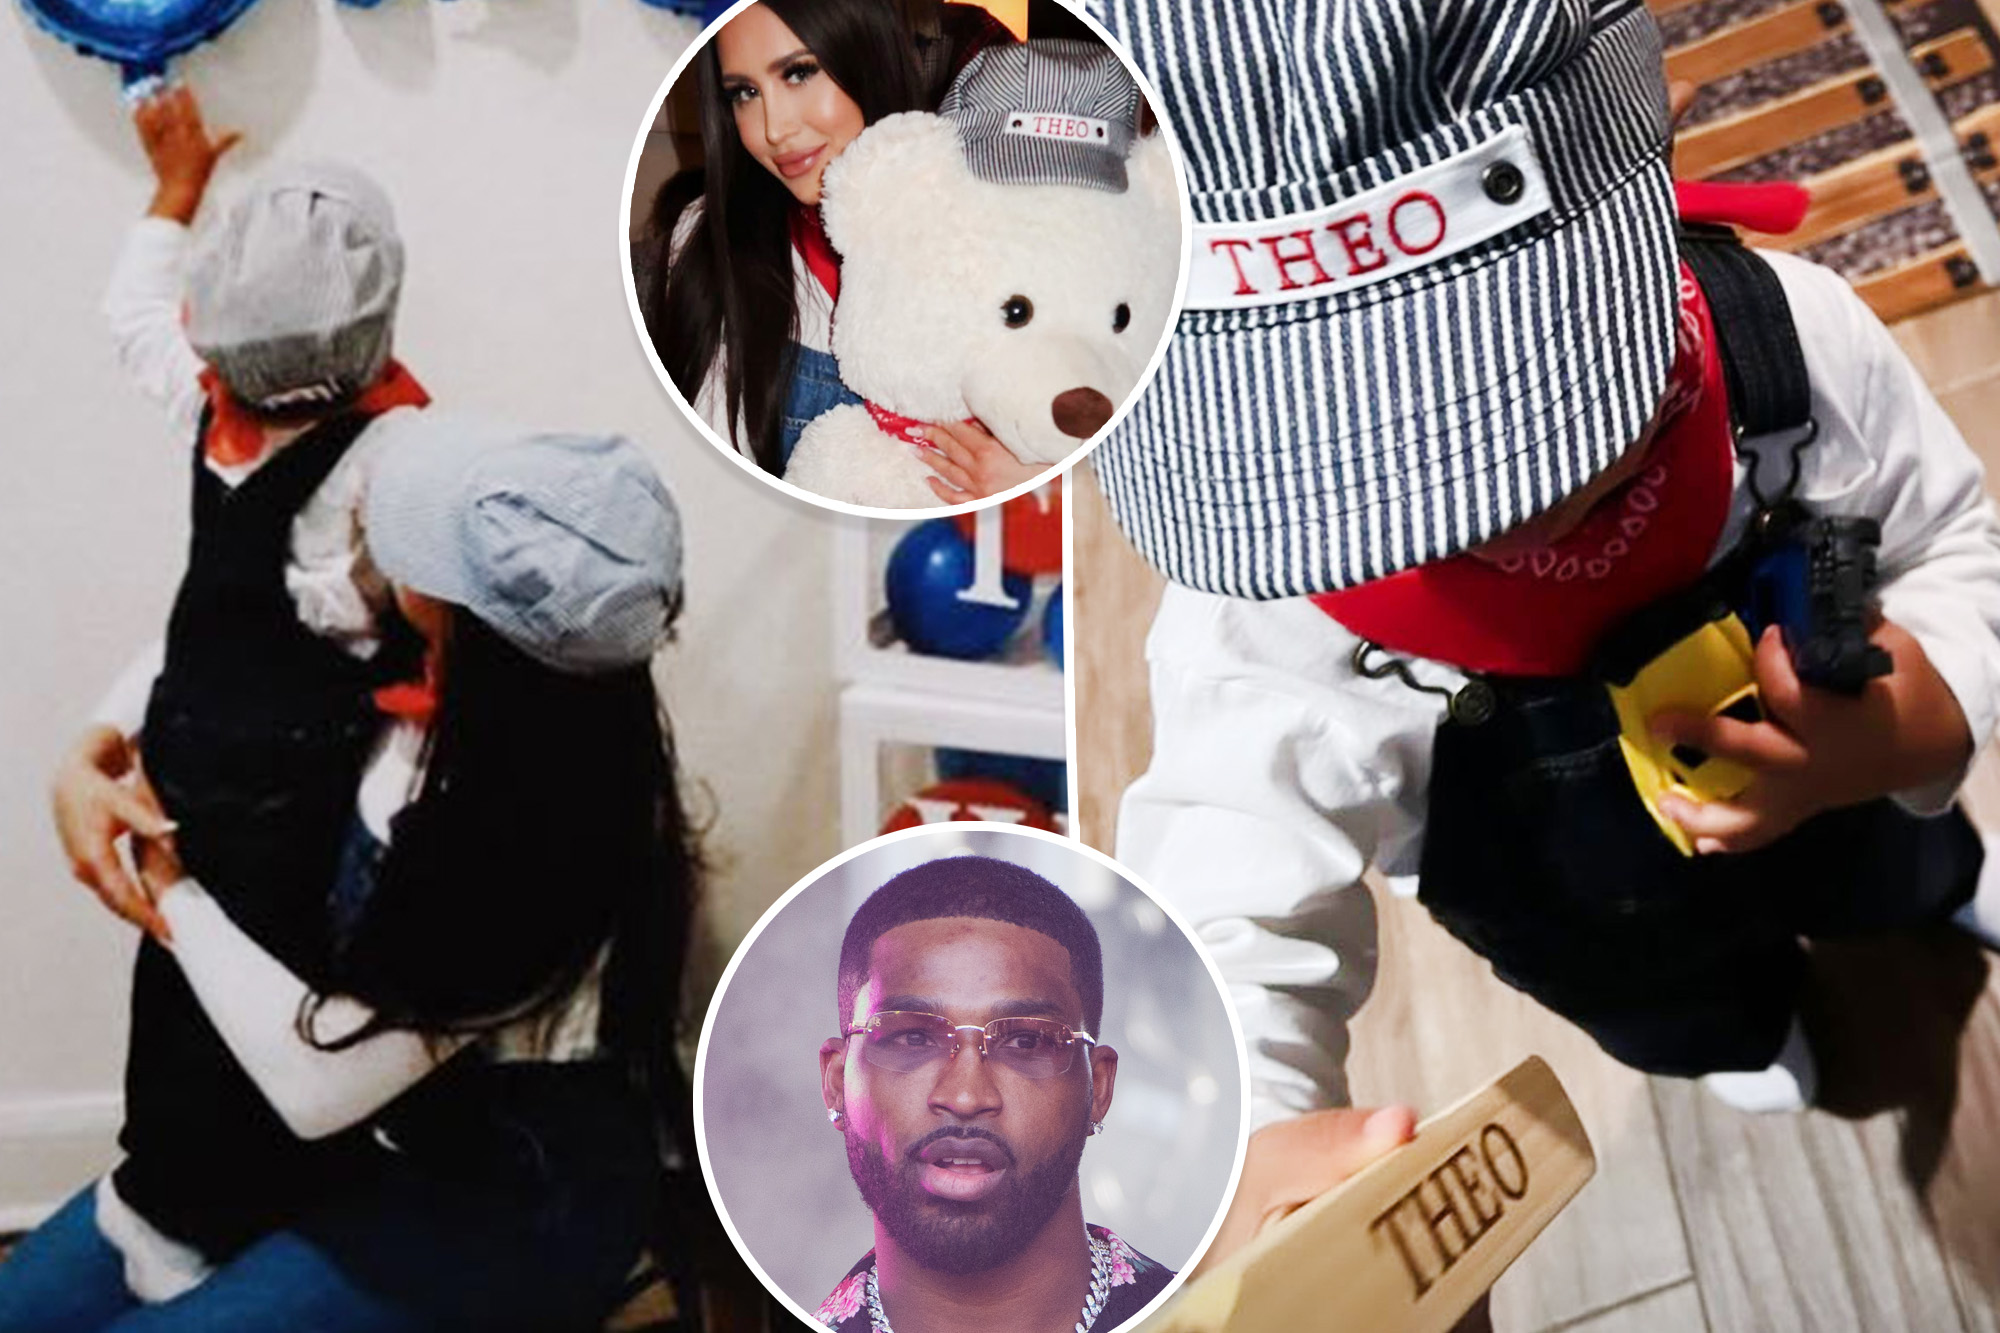 Maralee Nichols celebrates her and Tristan Thompson’s son Theo’s 2nd birthday with train party